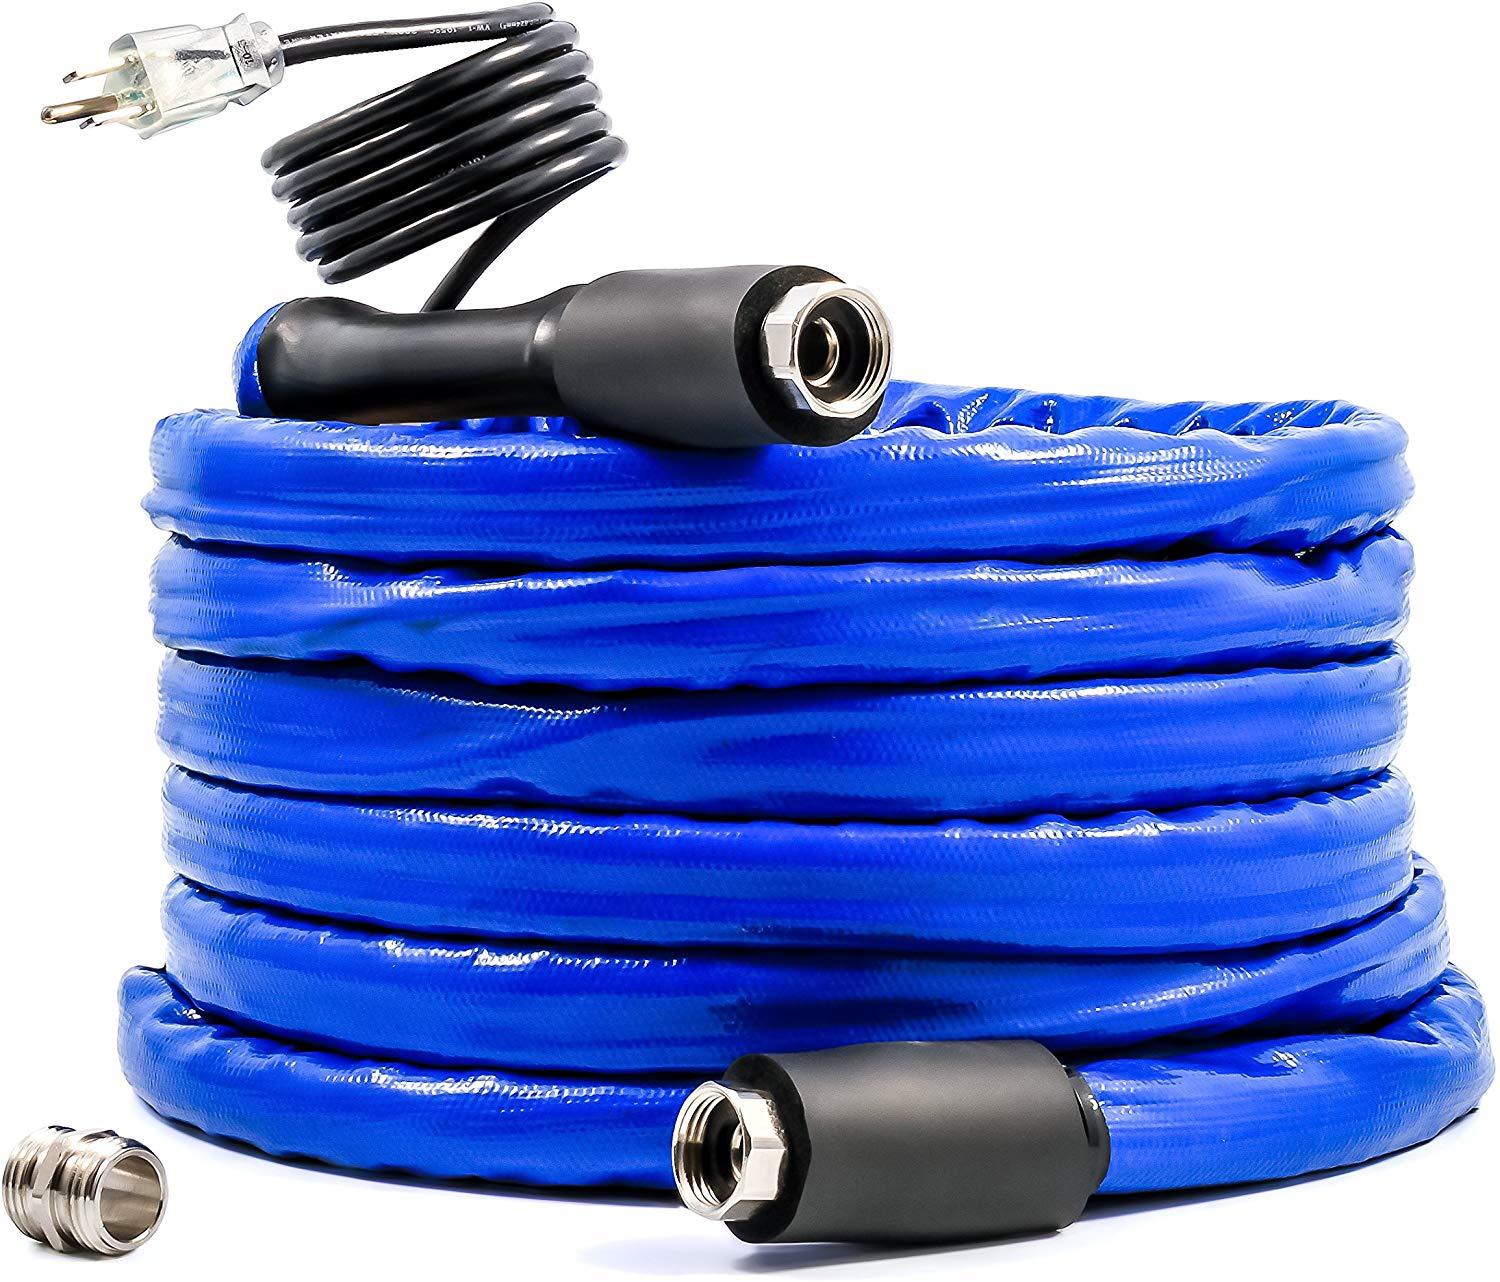  25 Foot Length Taste Pure Heated Drinking Water Hose with Energy Saving Thermostat